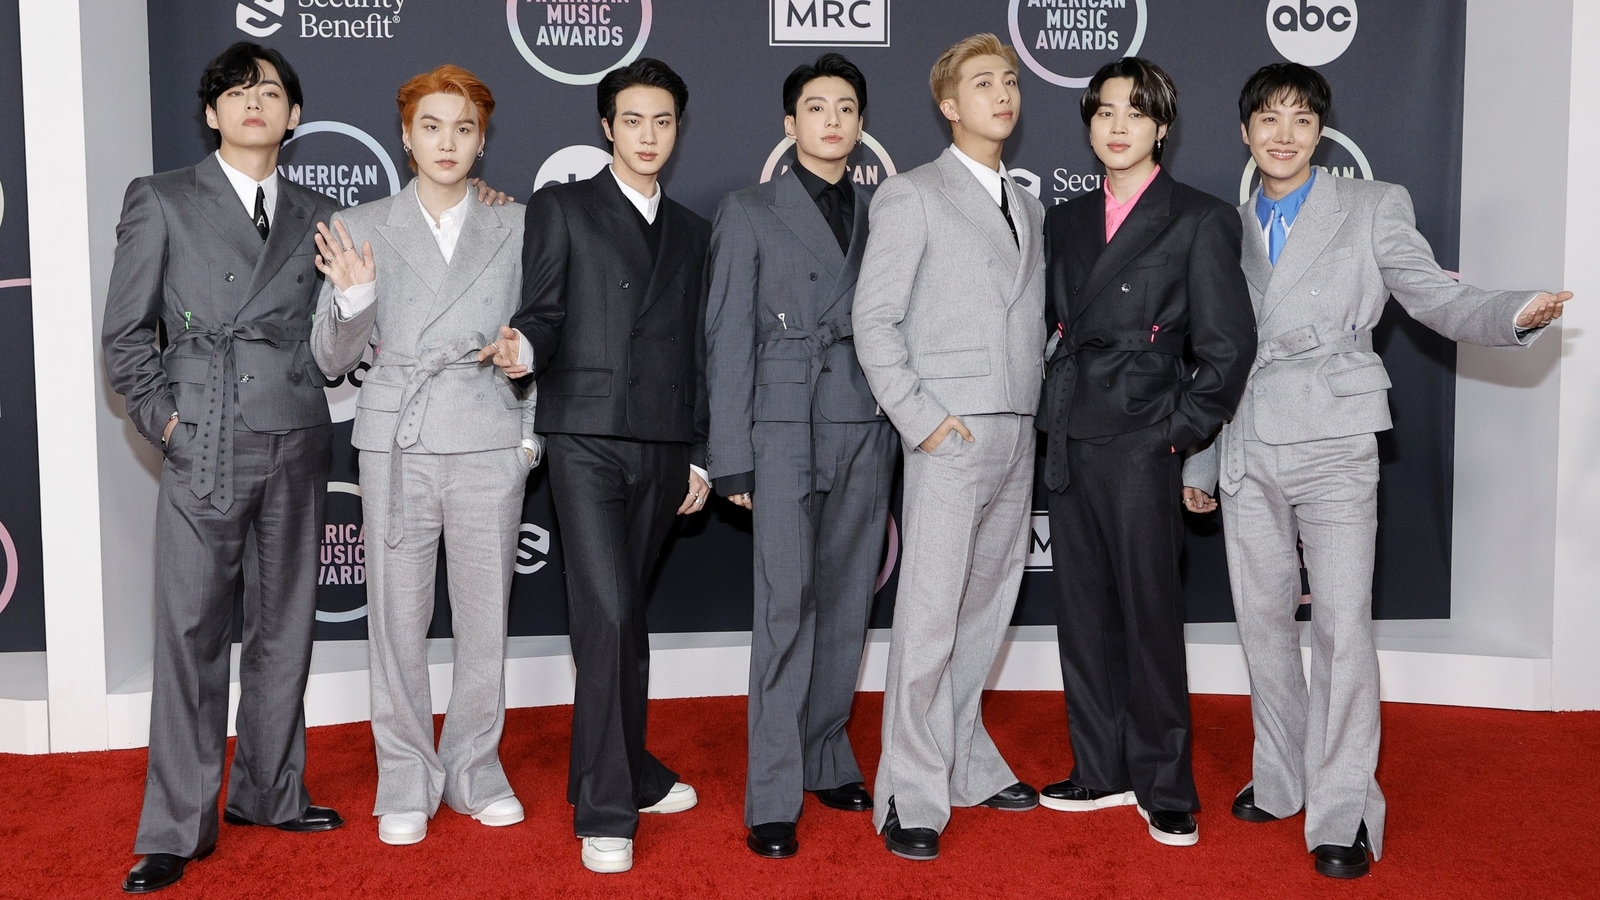 BTS receives one nomination at Grammys 2022, BTS army says ‘they got